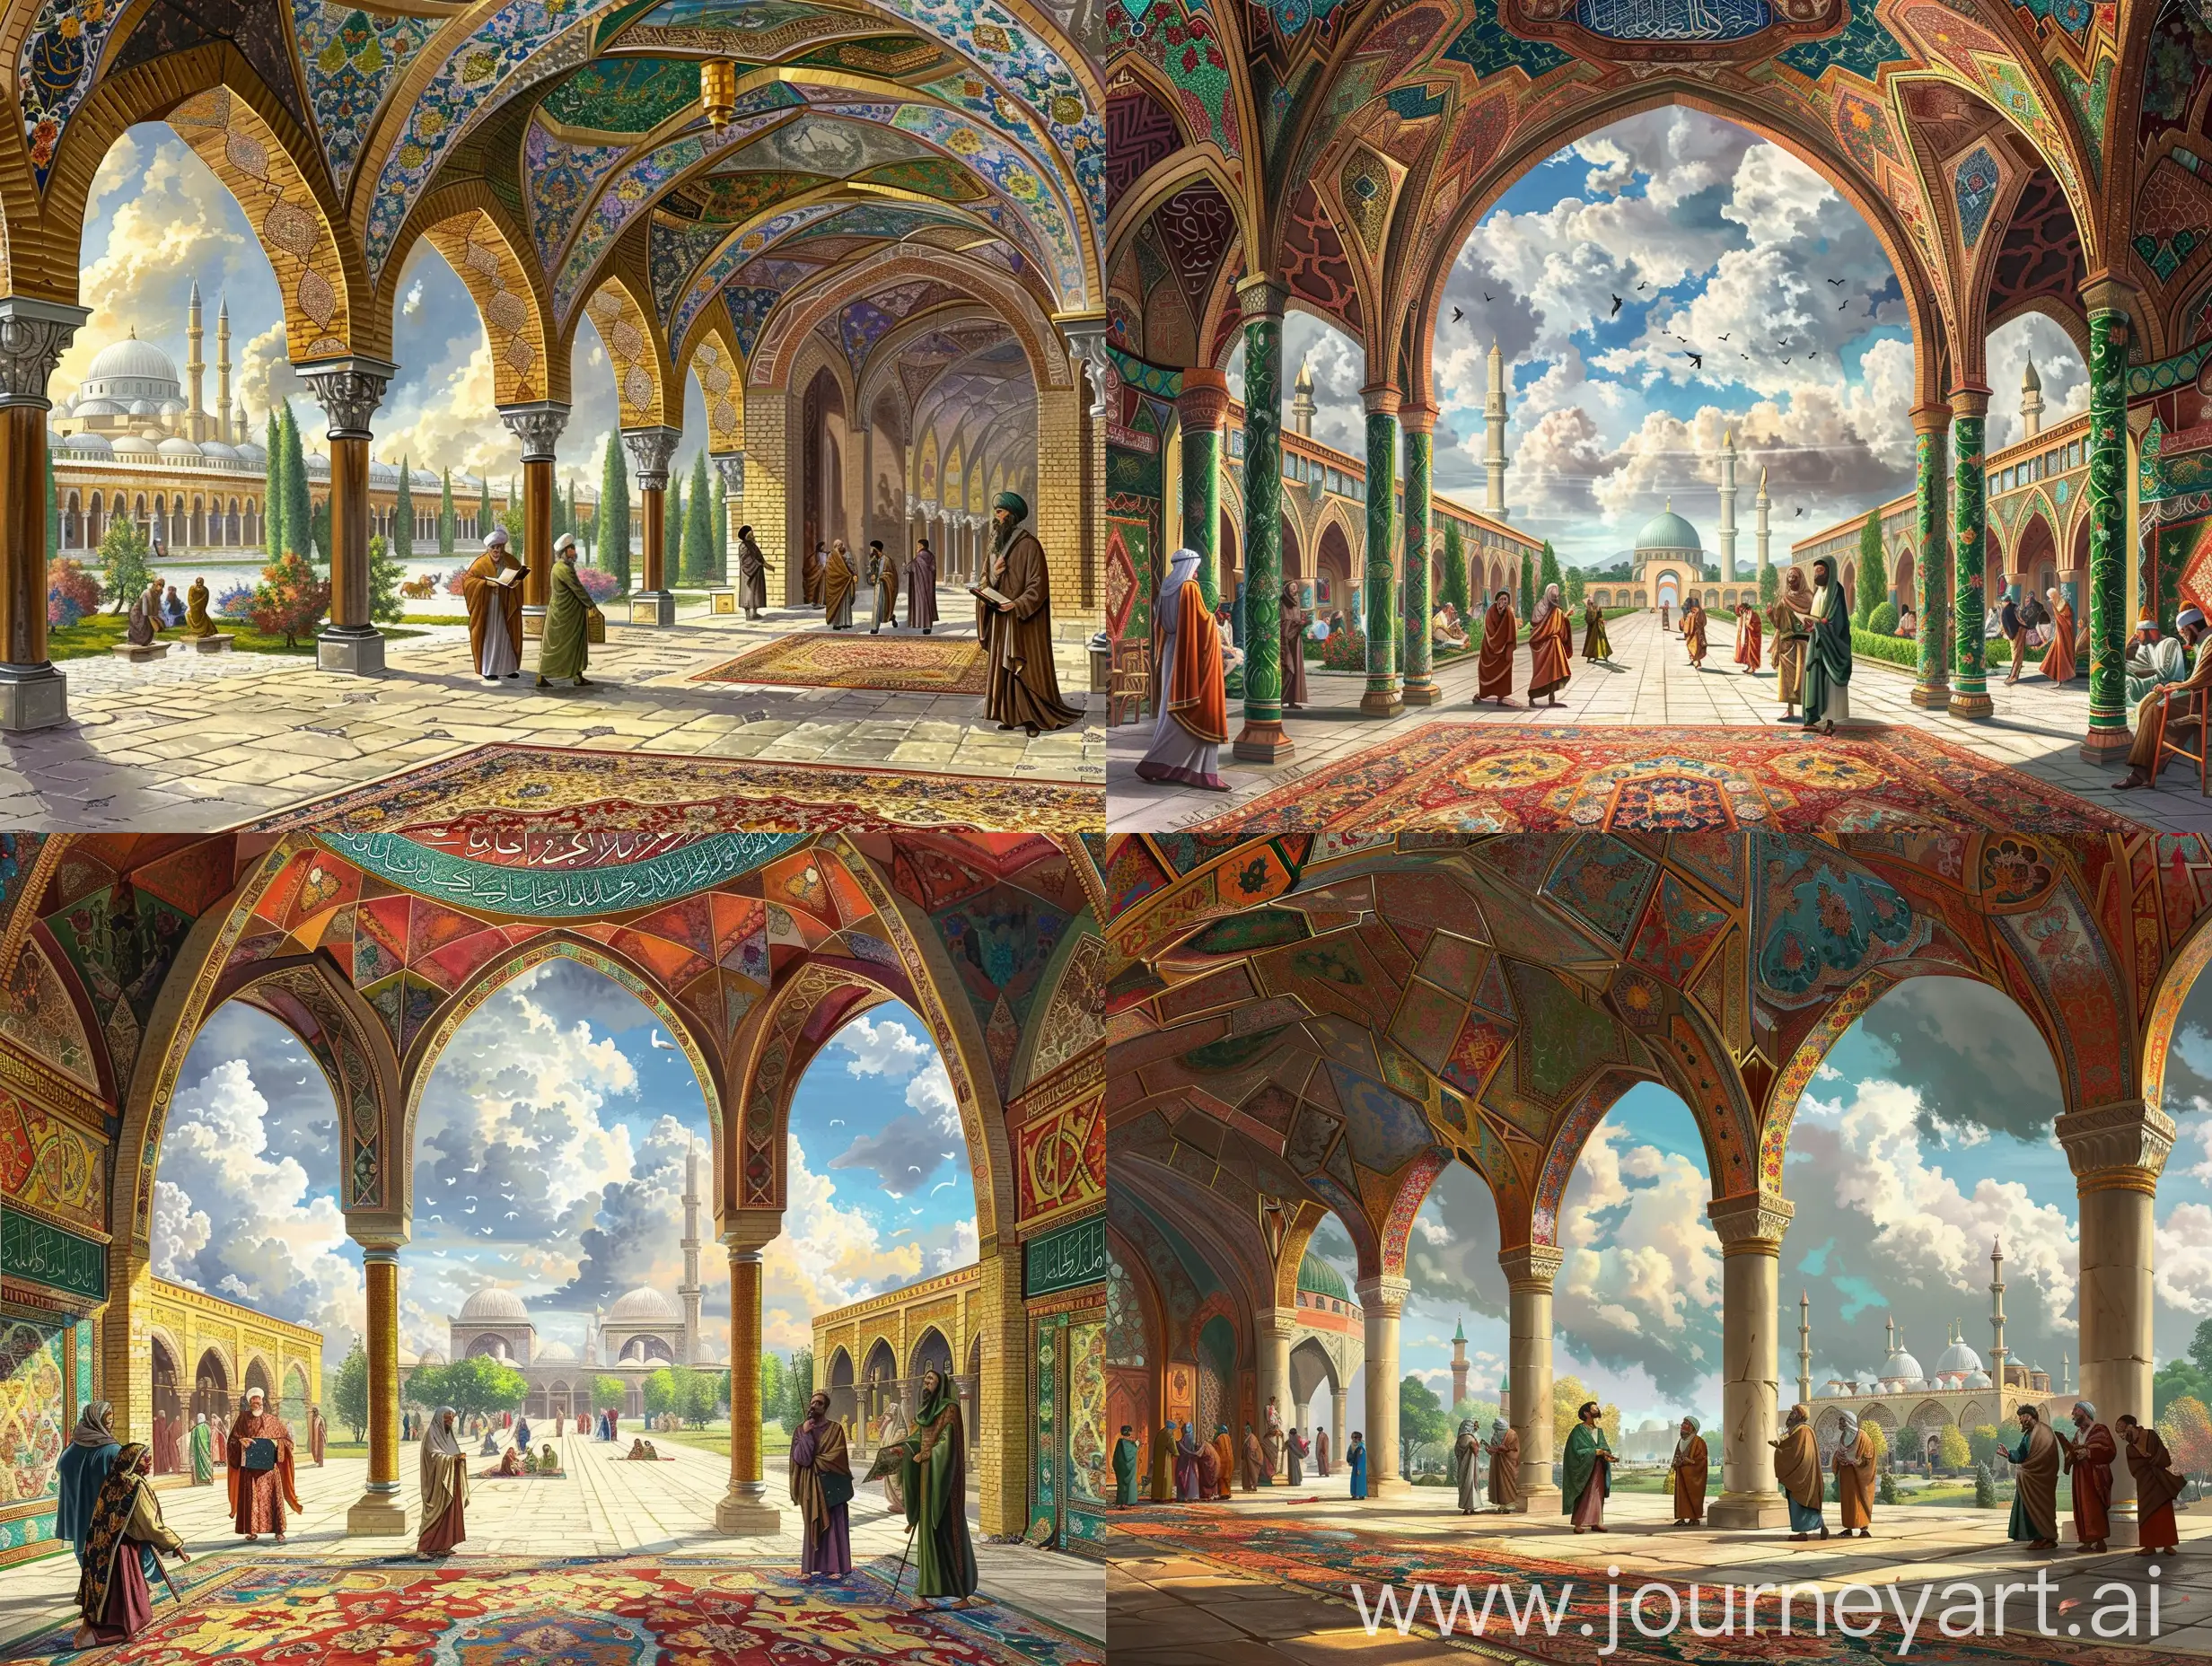 The School of Athens by Raphael but in Islamic style, set in a vibrant medieval Islamic hall, islamic shaped arches, decorated with persian art, Muqarnas on ceiling, Muslim scholars and philosophers debating, persian carpet on floor, Persian floral design on spandrels, cloudy sky, view of a mosque --ar 4:3 --v 6 --q 1